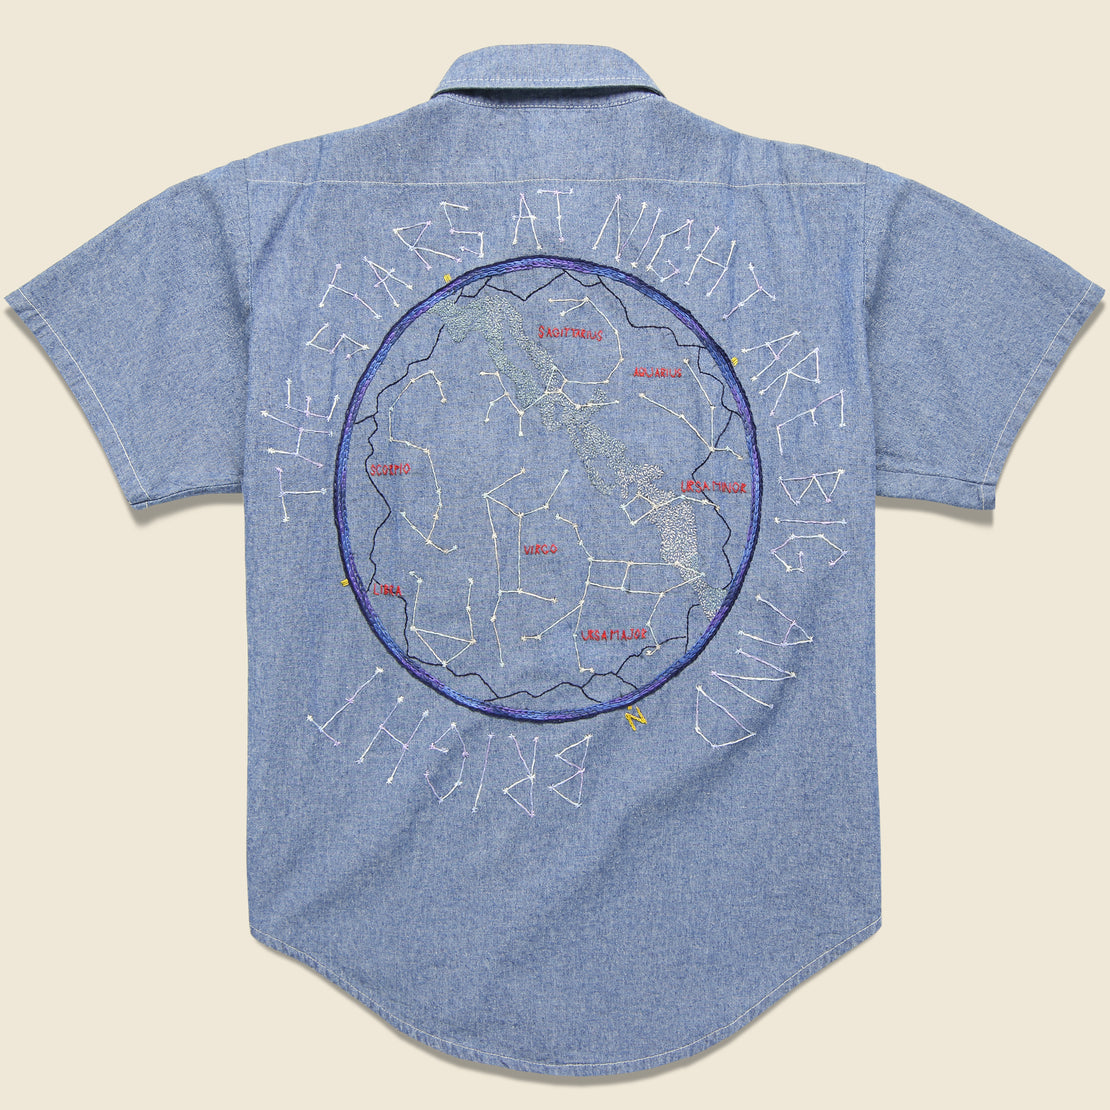 Jolly Knot Club Embroidered Chambray Shirt - The Stars at Night